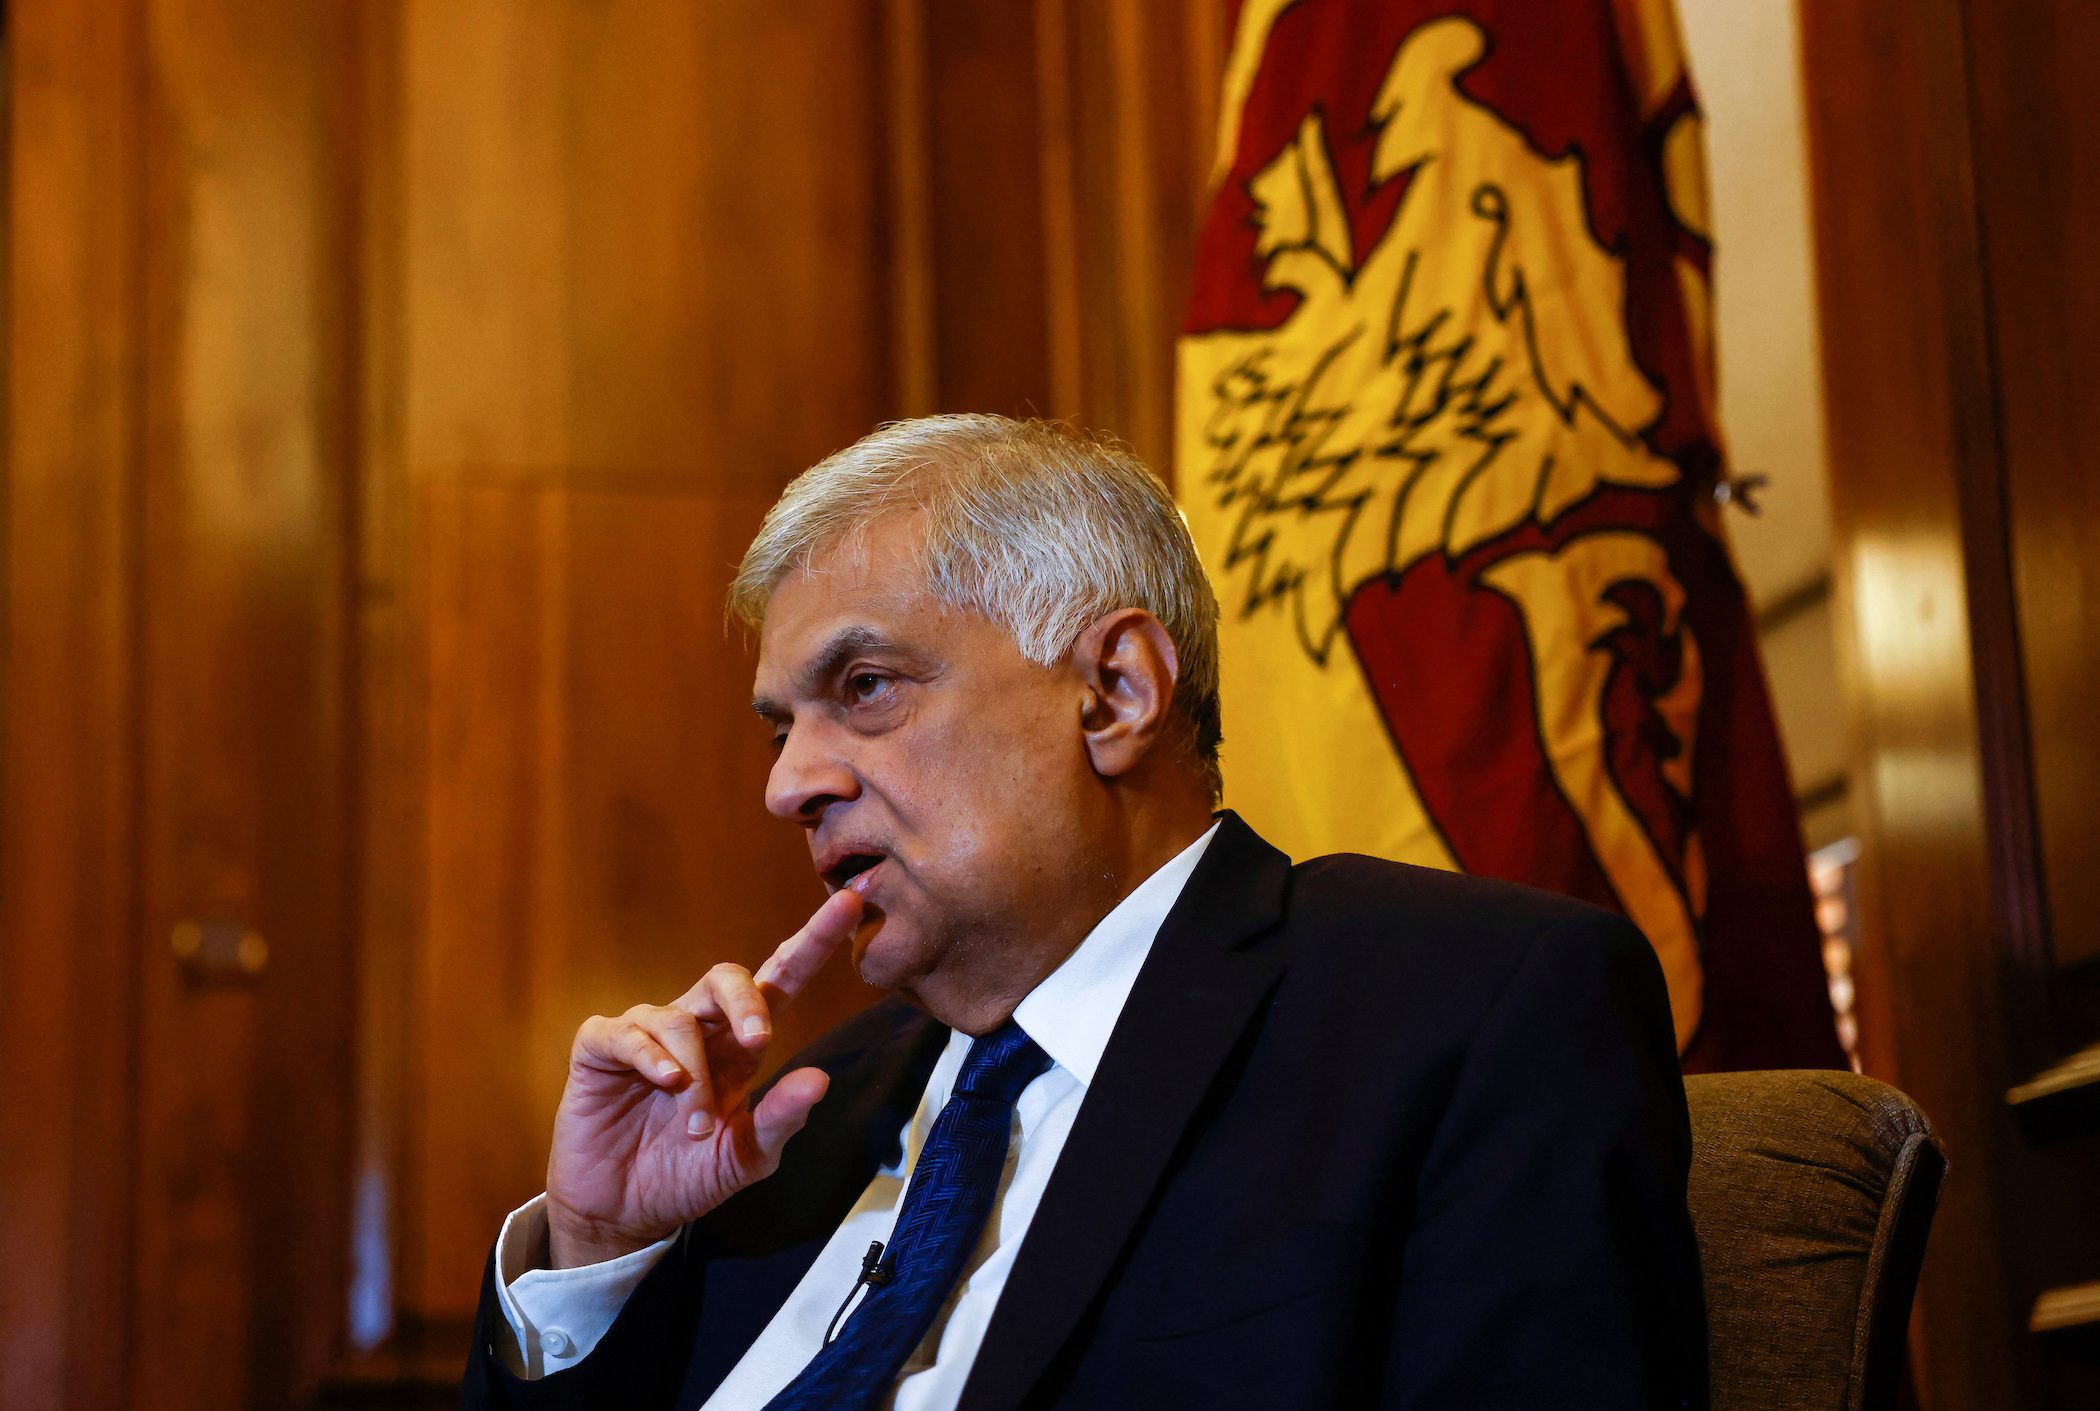 Crisis-hit Sri Lanka to ask Japan to open talks with main creditors